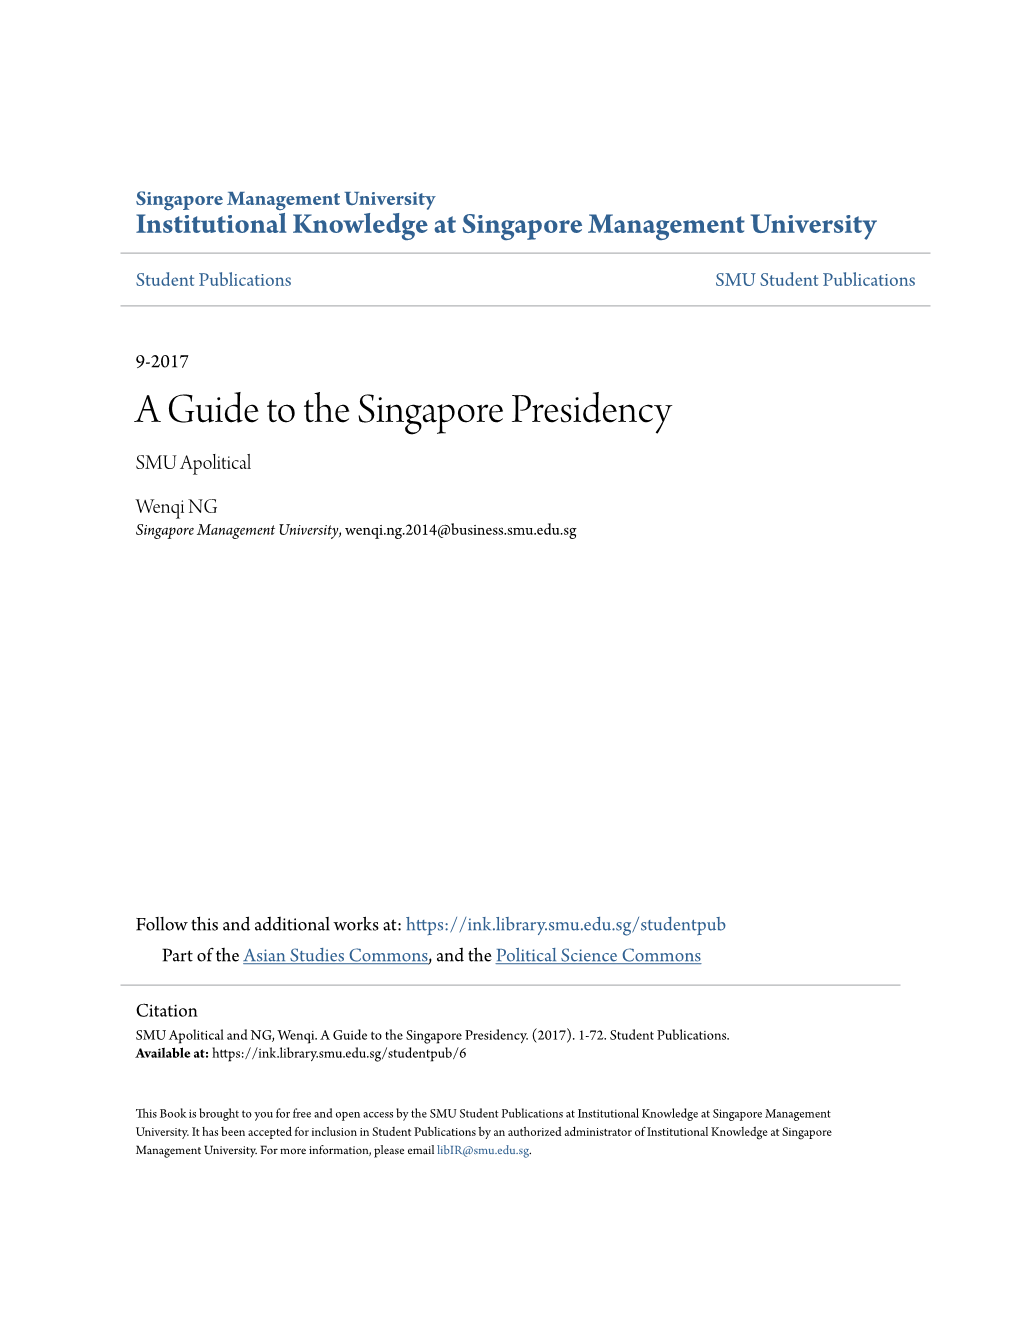 A Guide to the Singapore Presidency SMU Apolitical